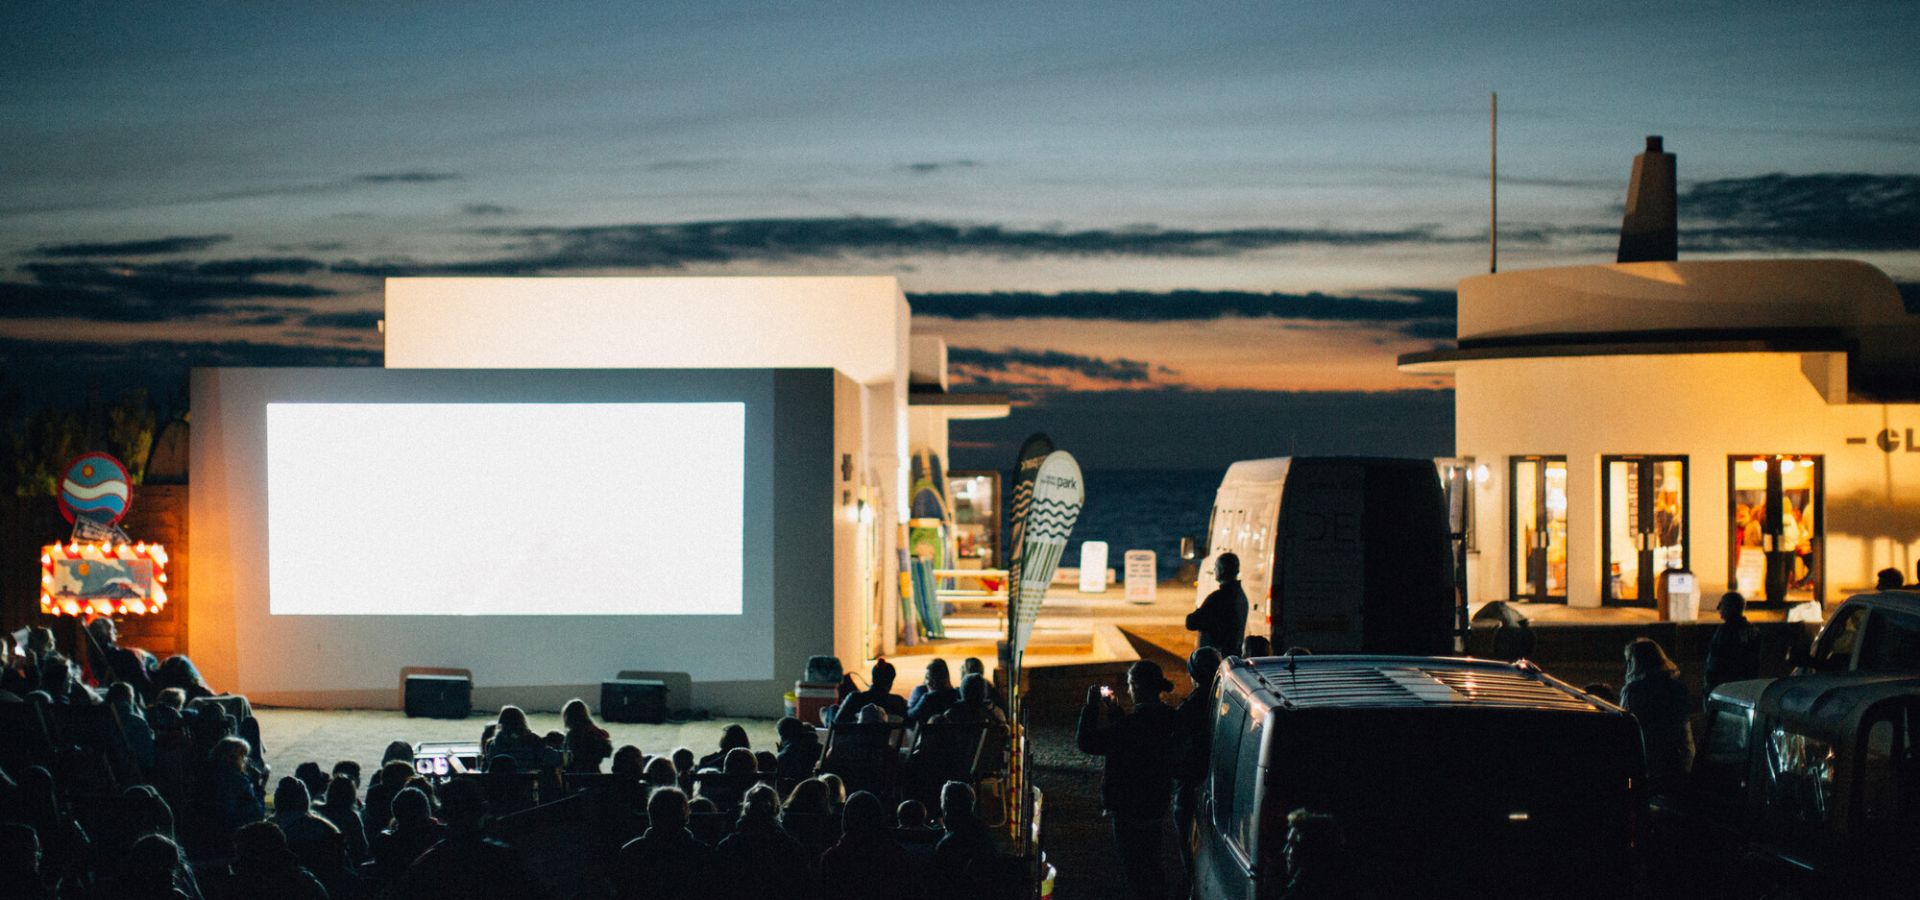 Outdoor film screening in the evening by the beach